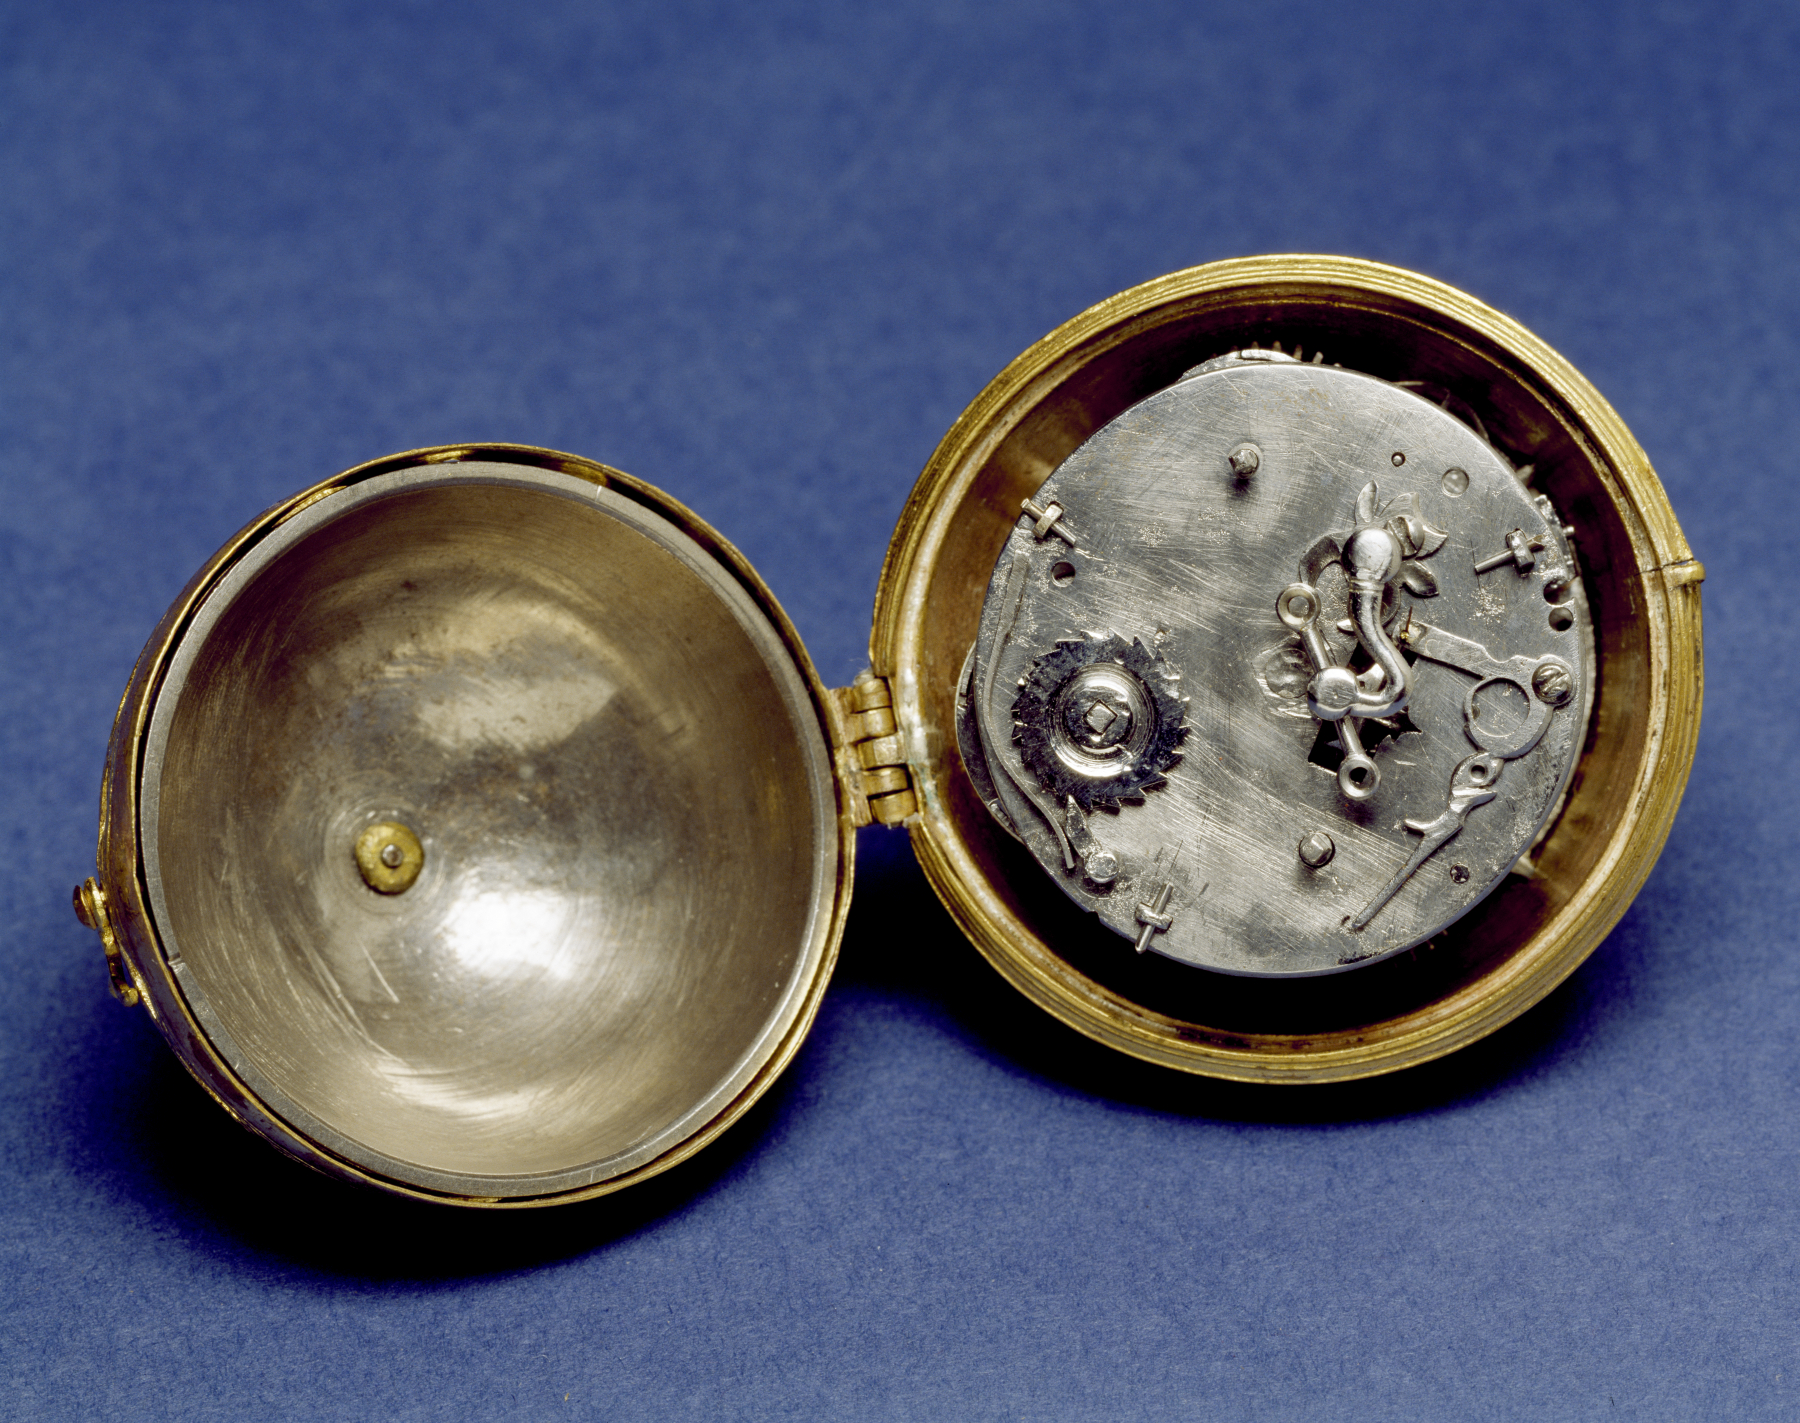 Melanchthon's Watch - All About History | Everand